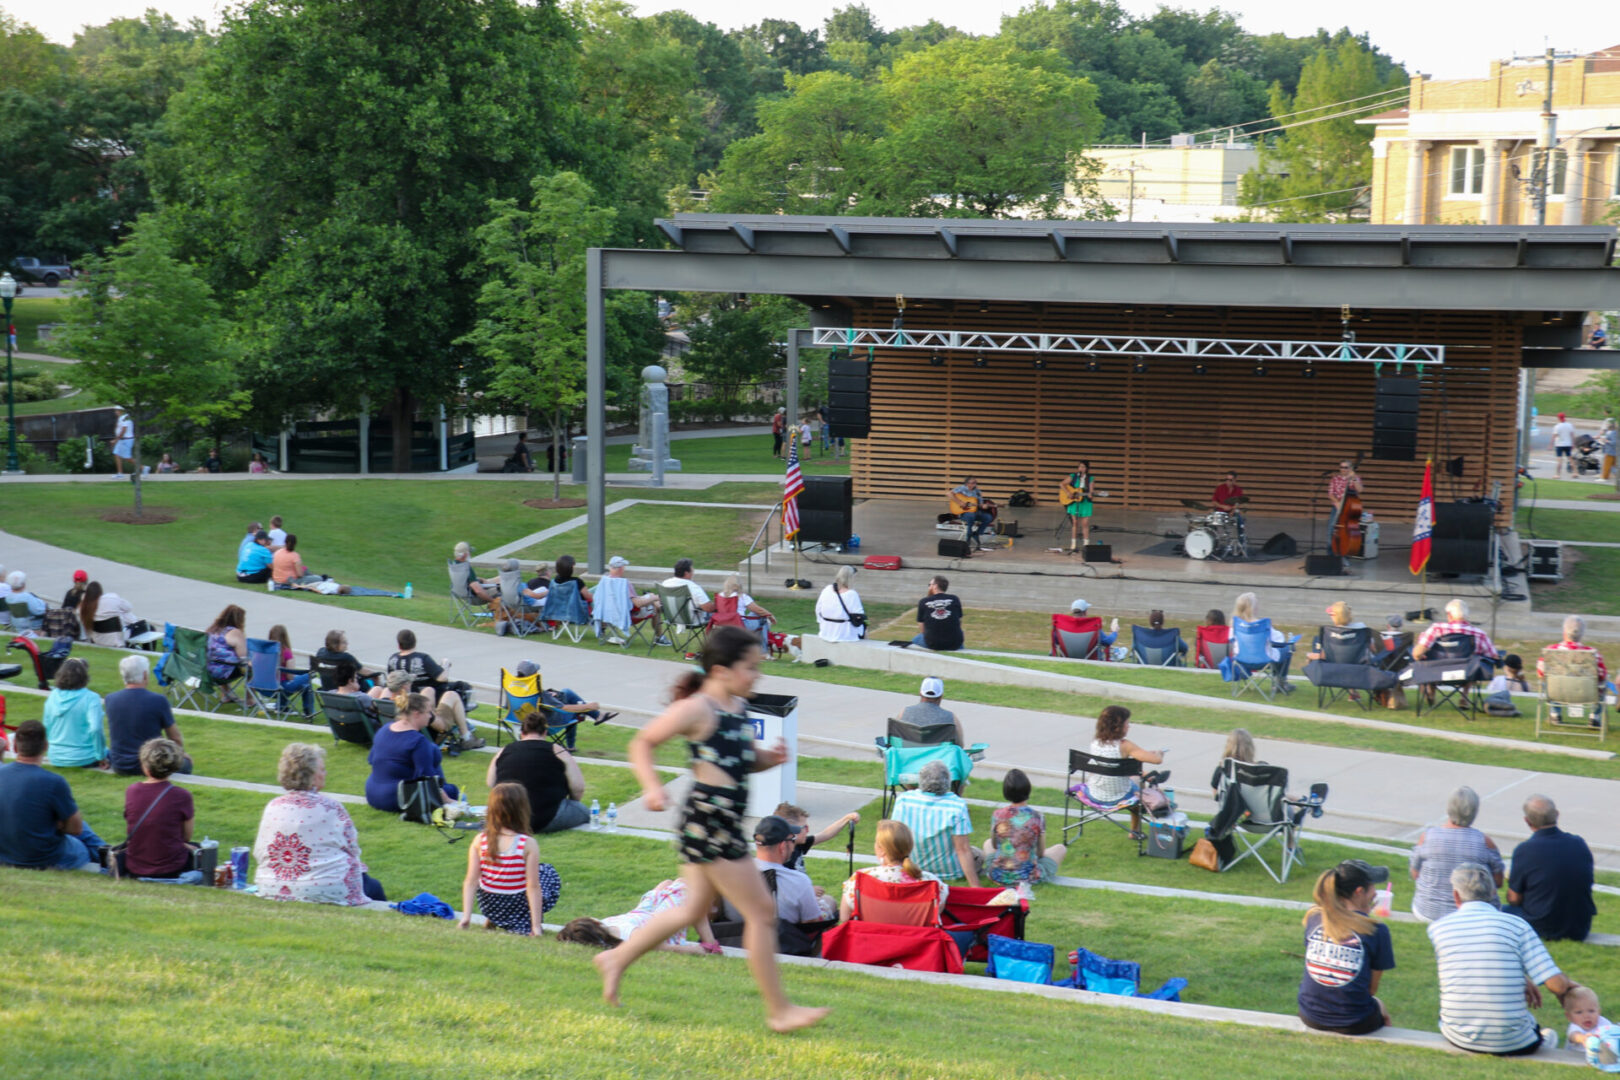 A crowd of people sitting on the grass in front of an amphitheater.